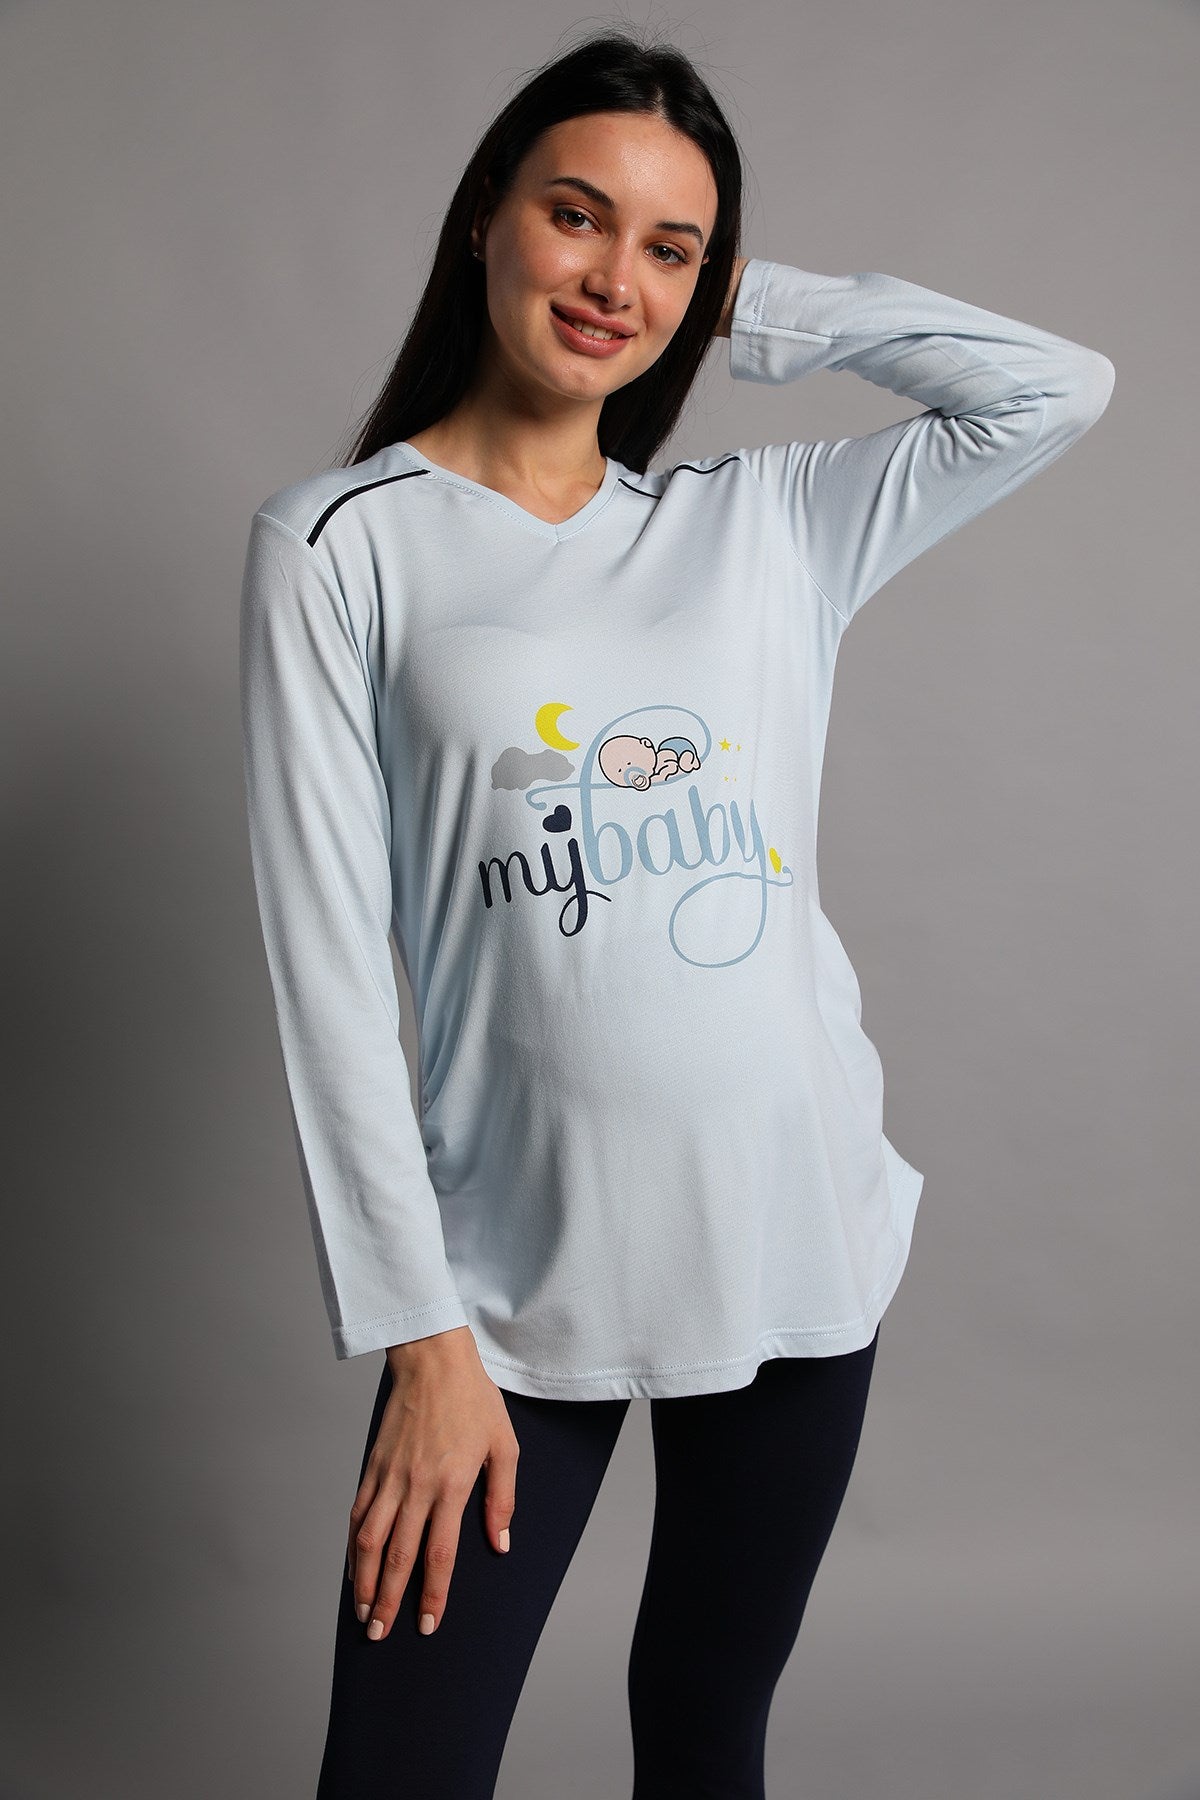 Shopymommy 5345 My Baby Maternity T-Shirt & Tights Set Blue